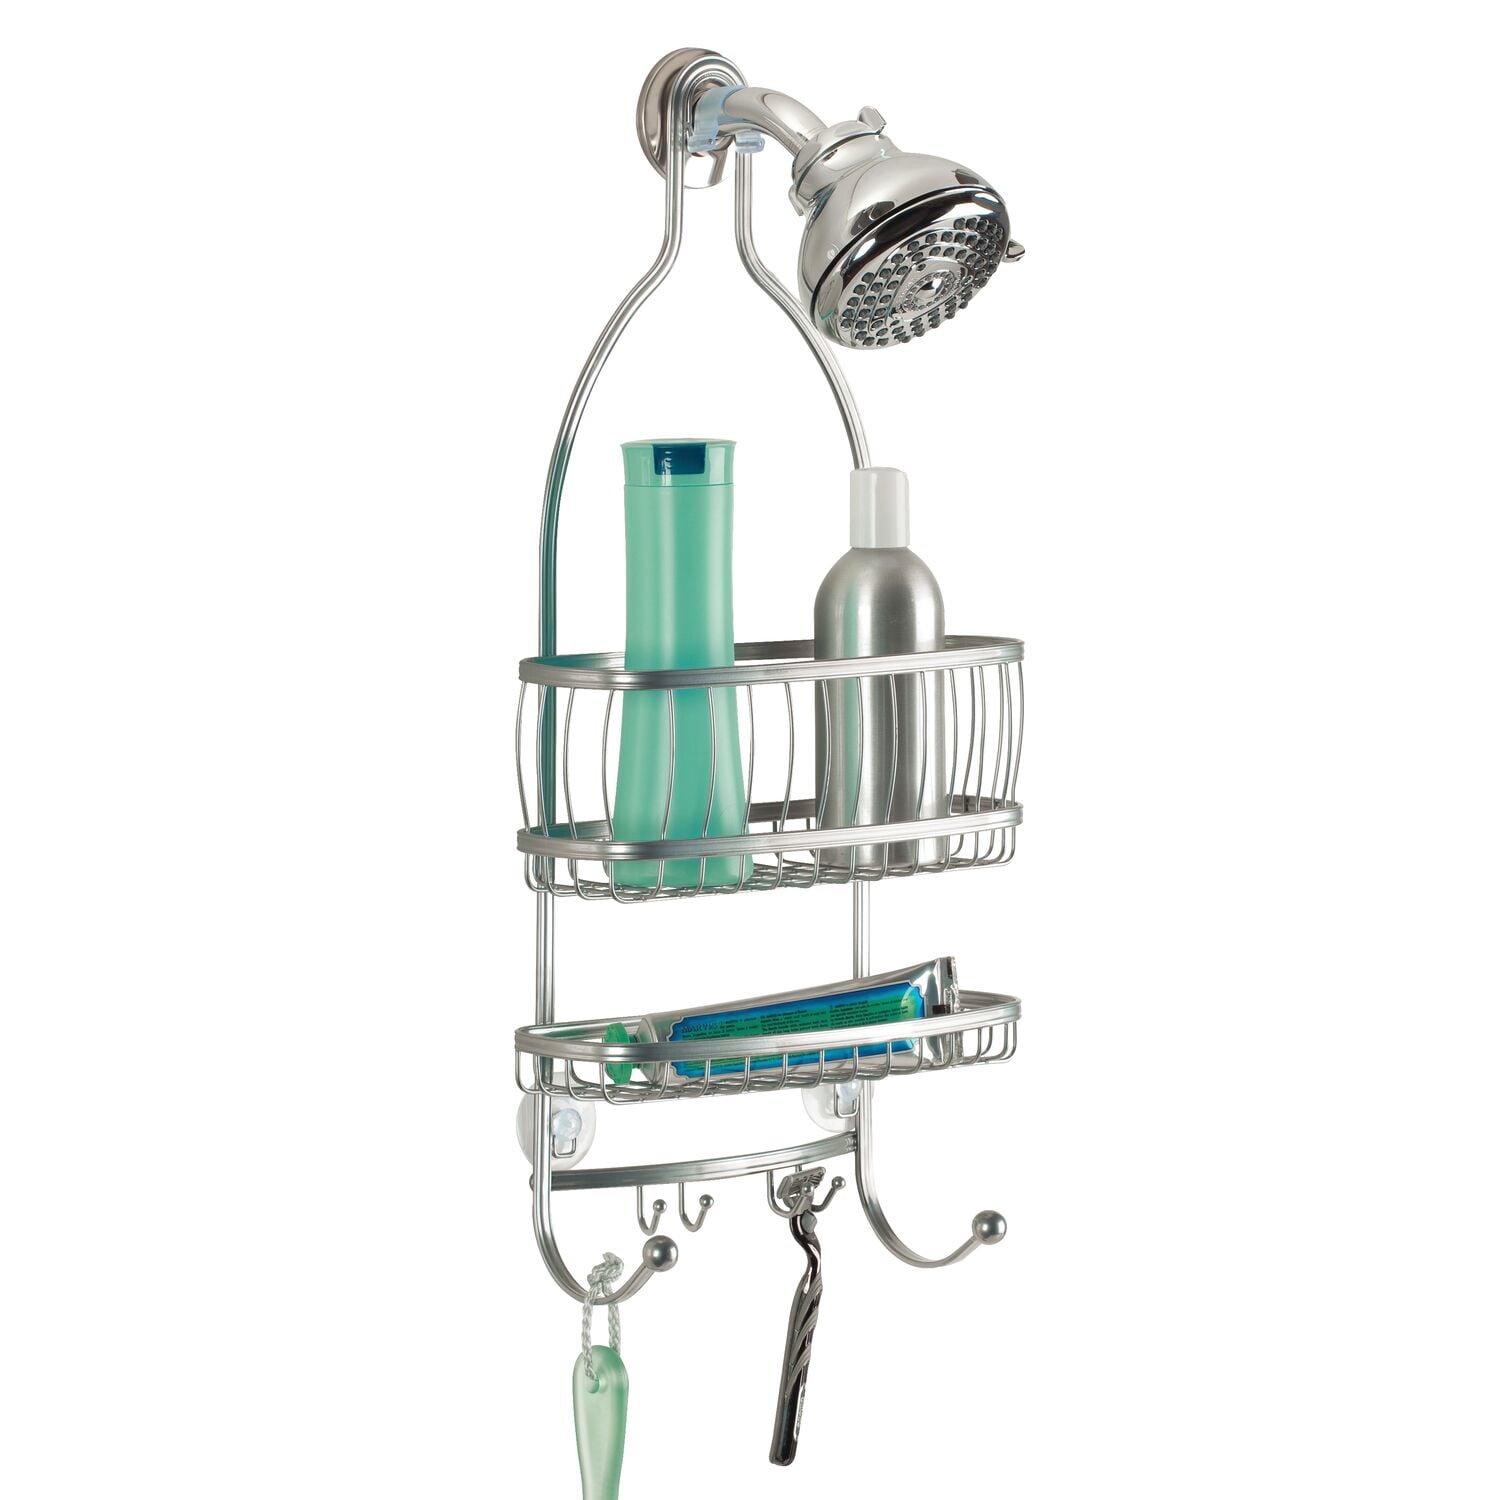 3-Tier Chrome Shower Caddy With Suction Fix - Home Store + More